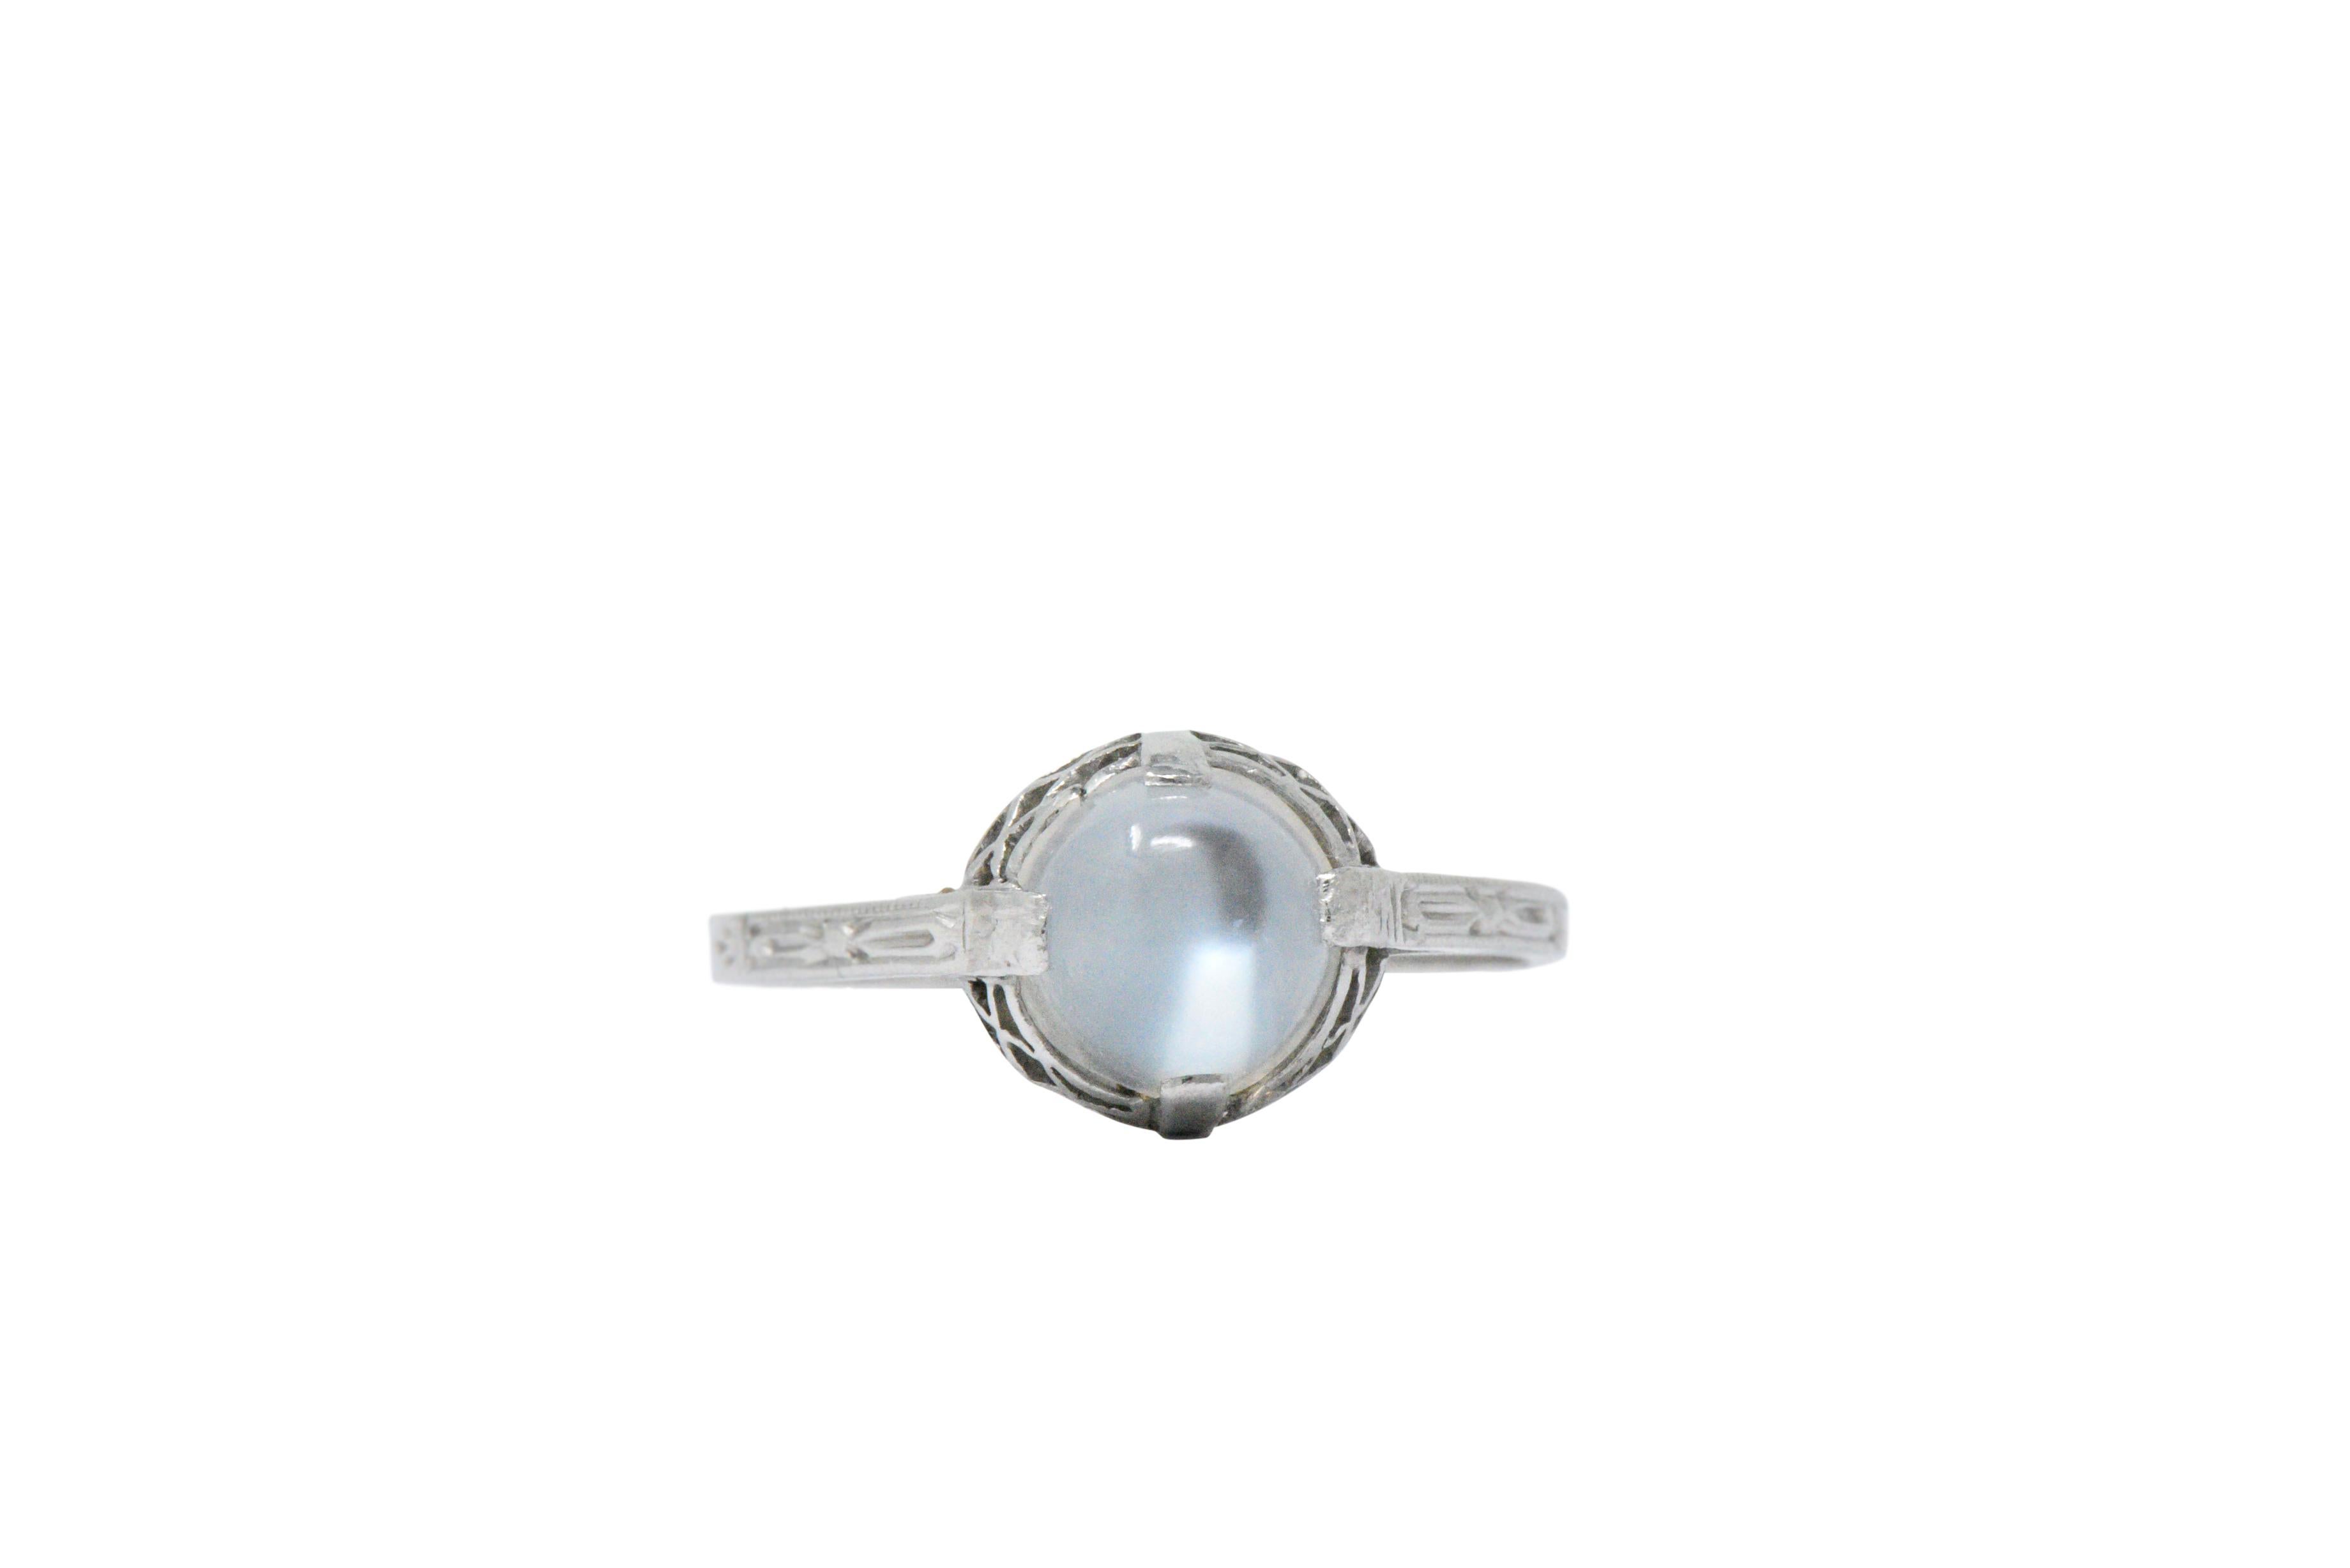 Centering a round cabochon moonstone measuring approximately 6.8 x 5.8 mm

Beautiful billowy light blue adularescence giving the ring an etherial feel

North, East, South, West setting with a pierced almost 